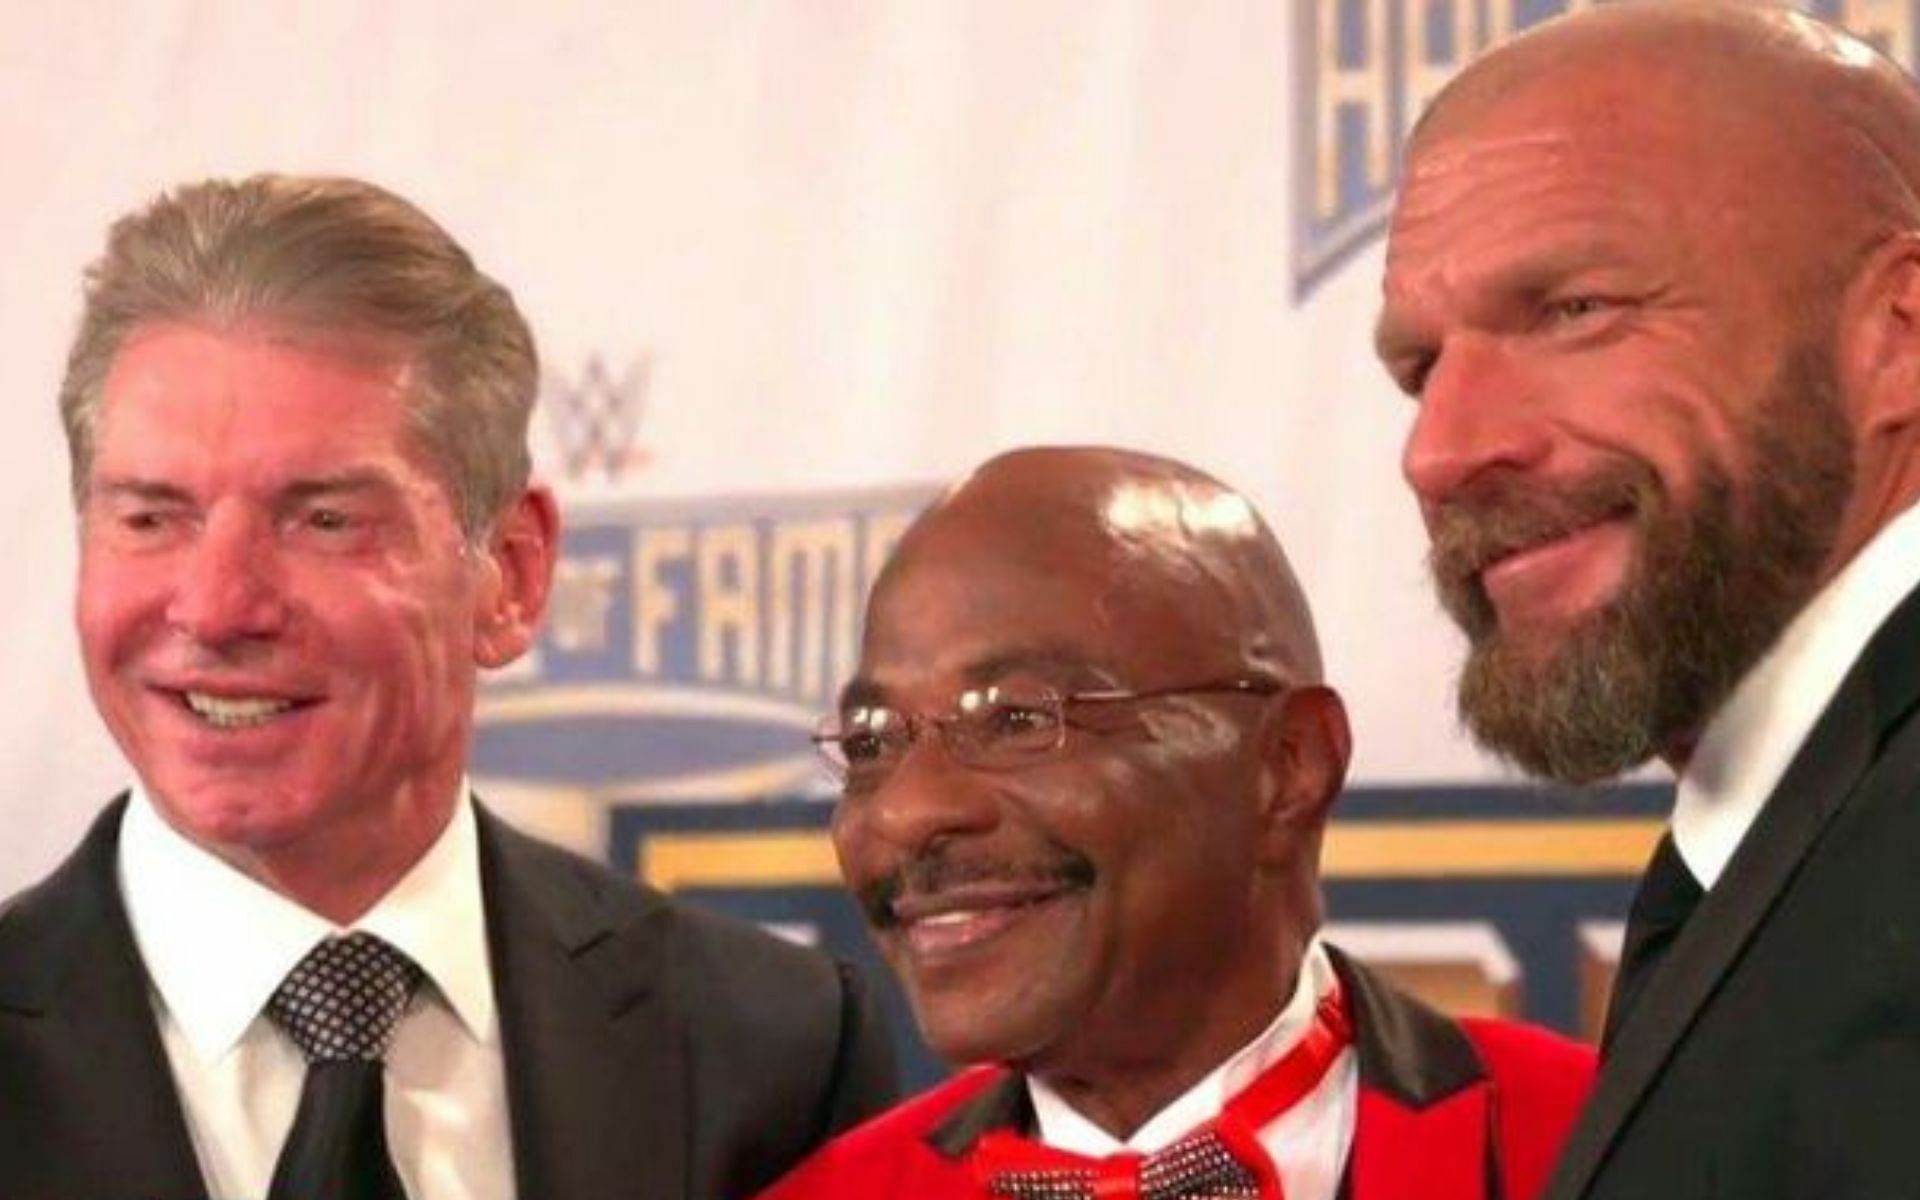 The Former SmackDown GM believes that one WrestleMania match is too close to call